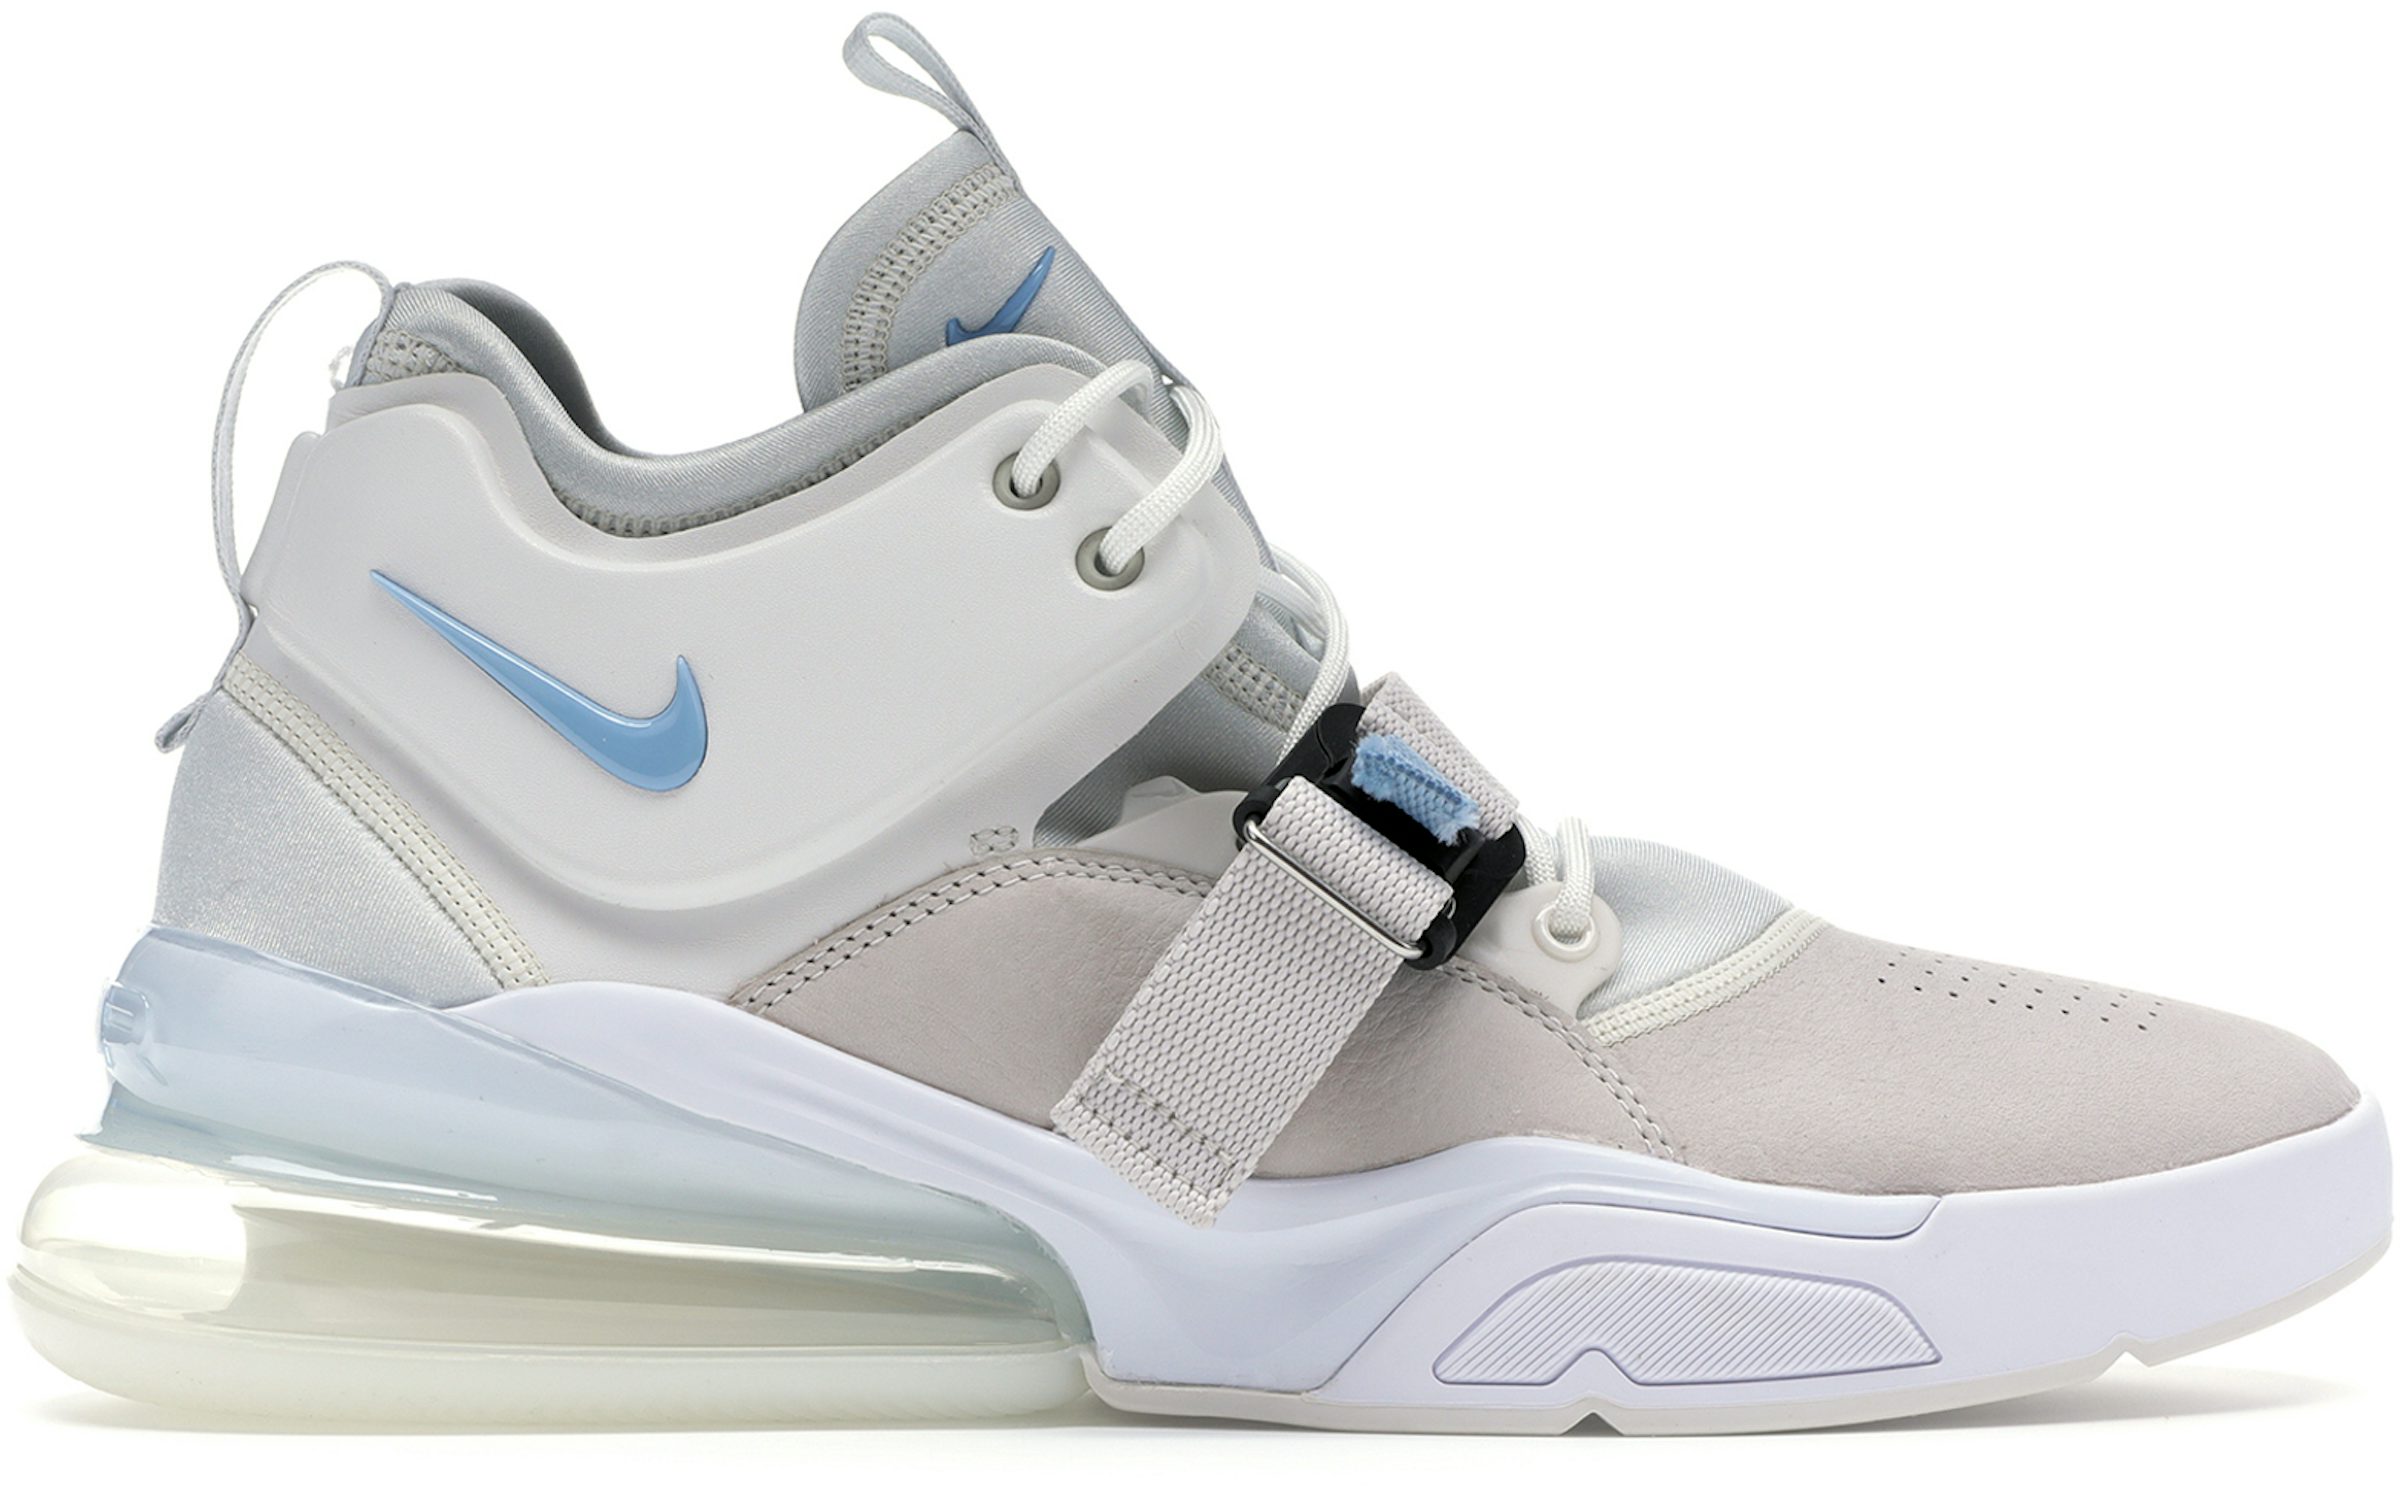 Buy Nike Air Force Shoes & New Sneakers - StockX